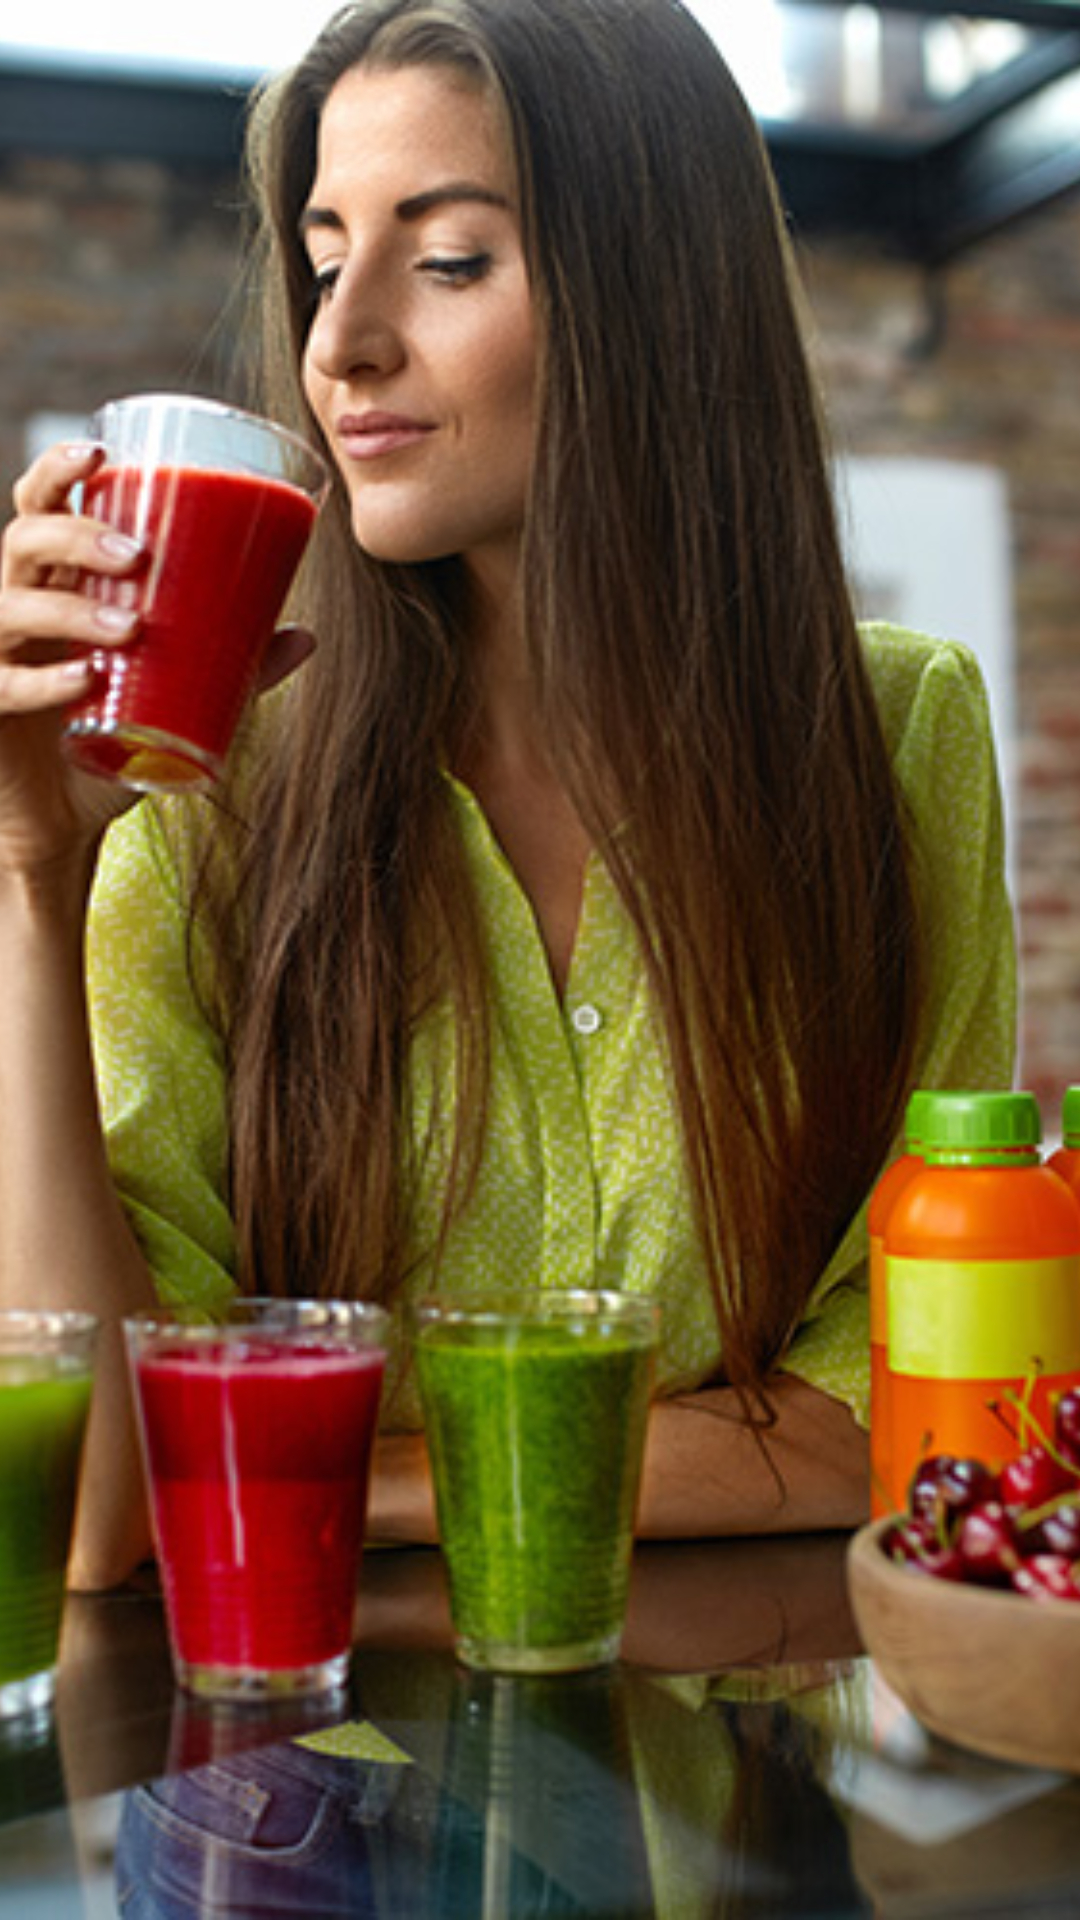 5 indicators that your body requires detoxification